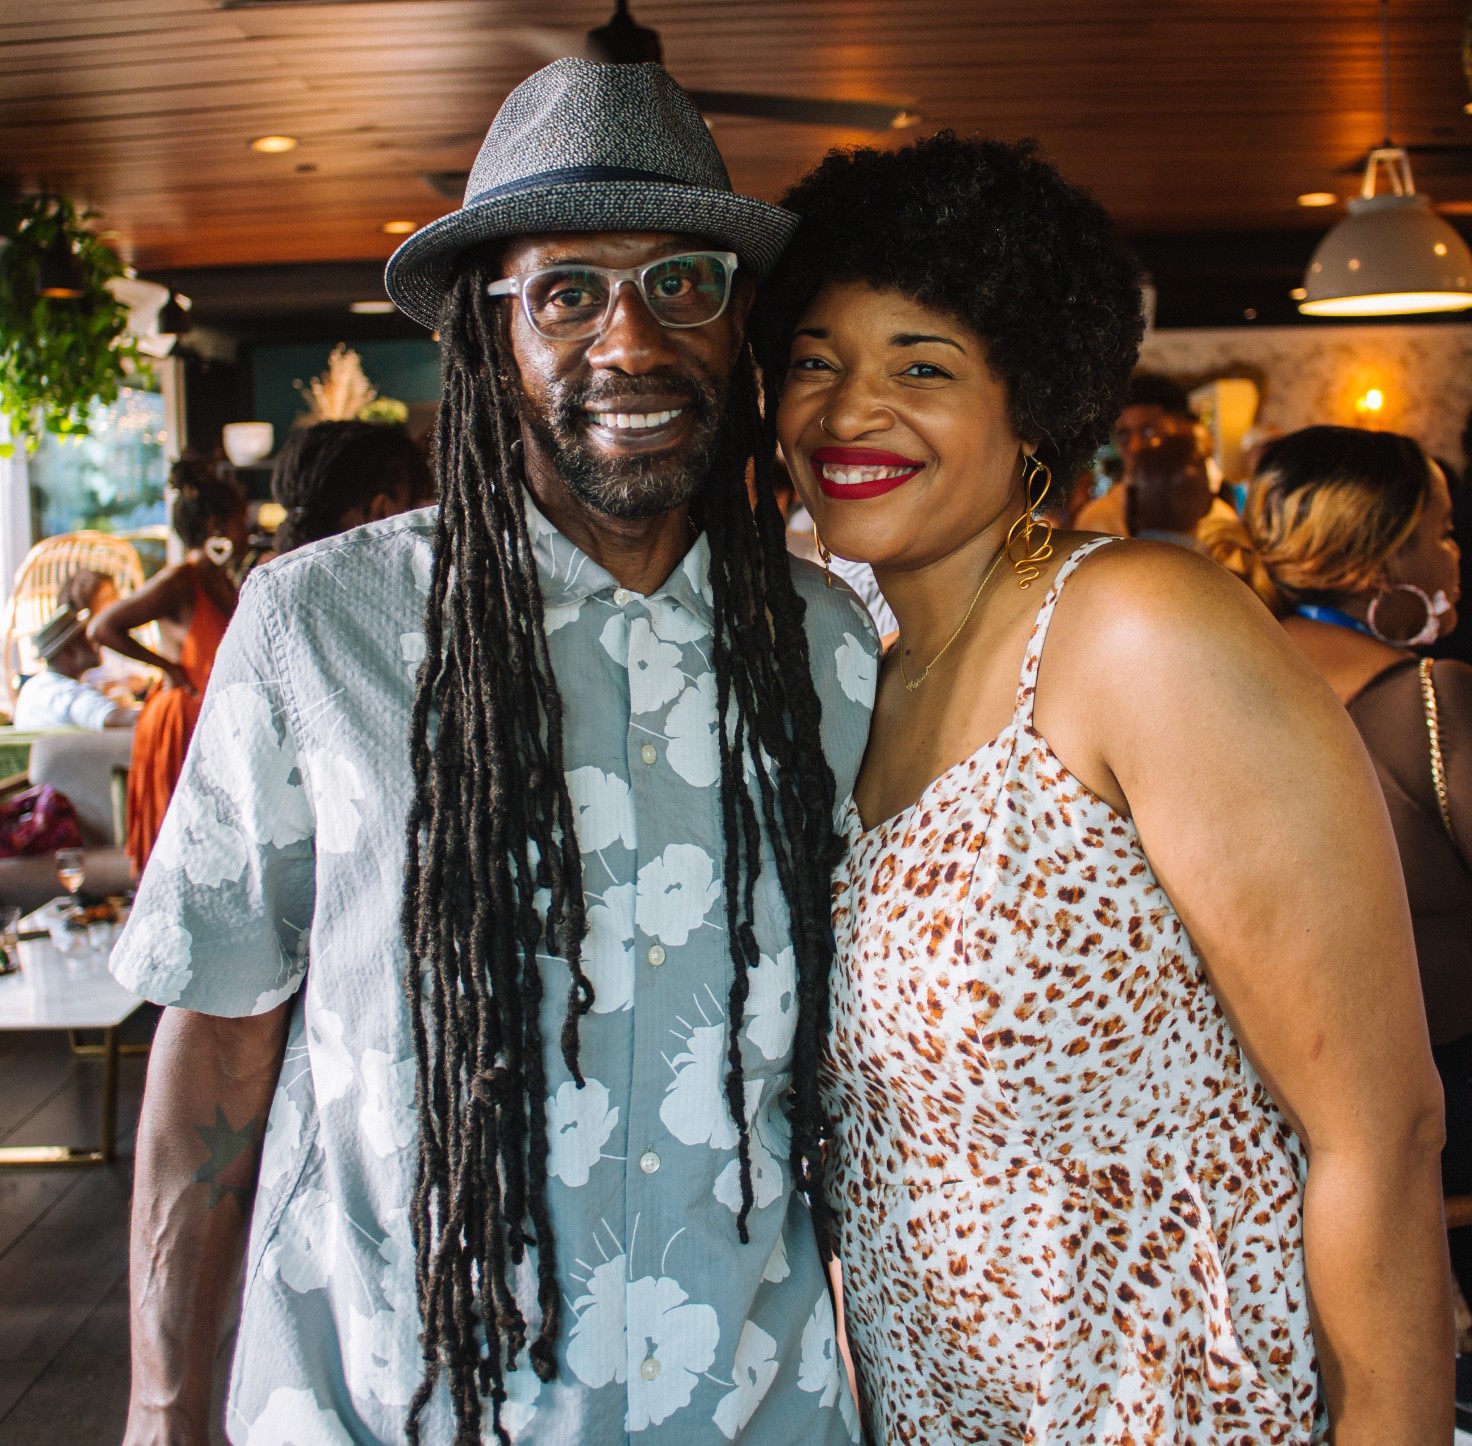 Two people, a Black man with long locs and a Black person with a fro and a dress, are standing together smiling at the camera.